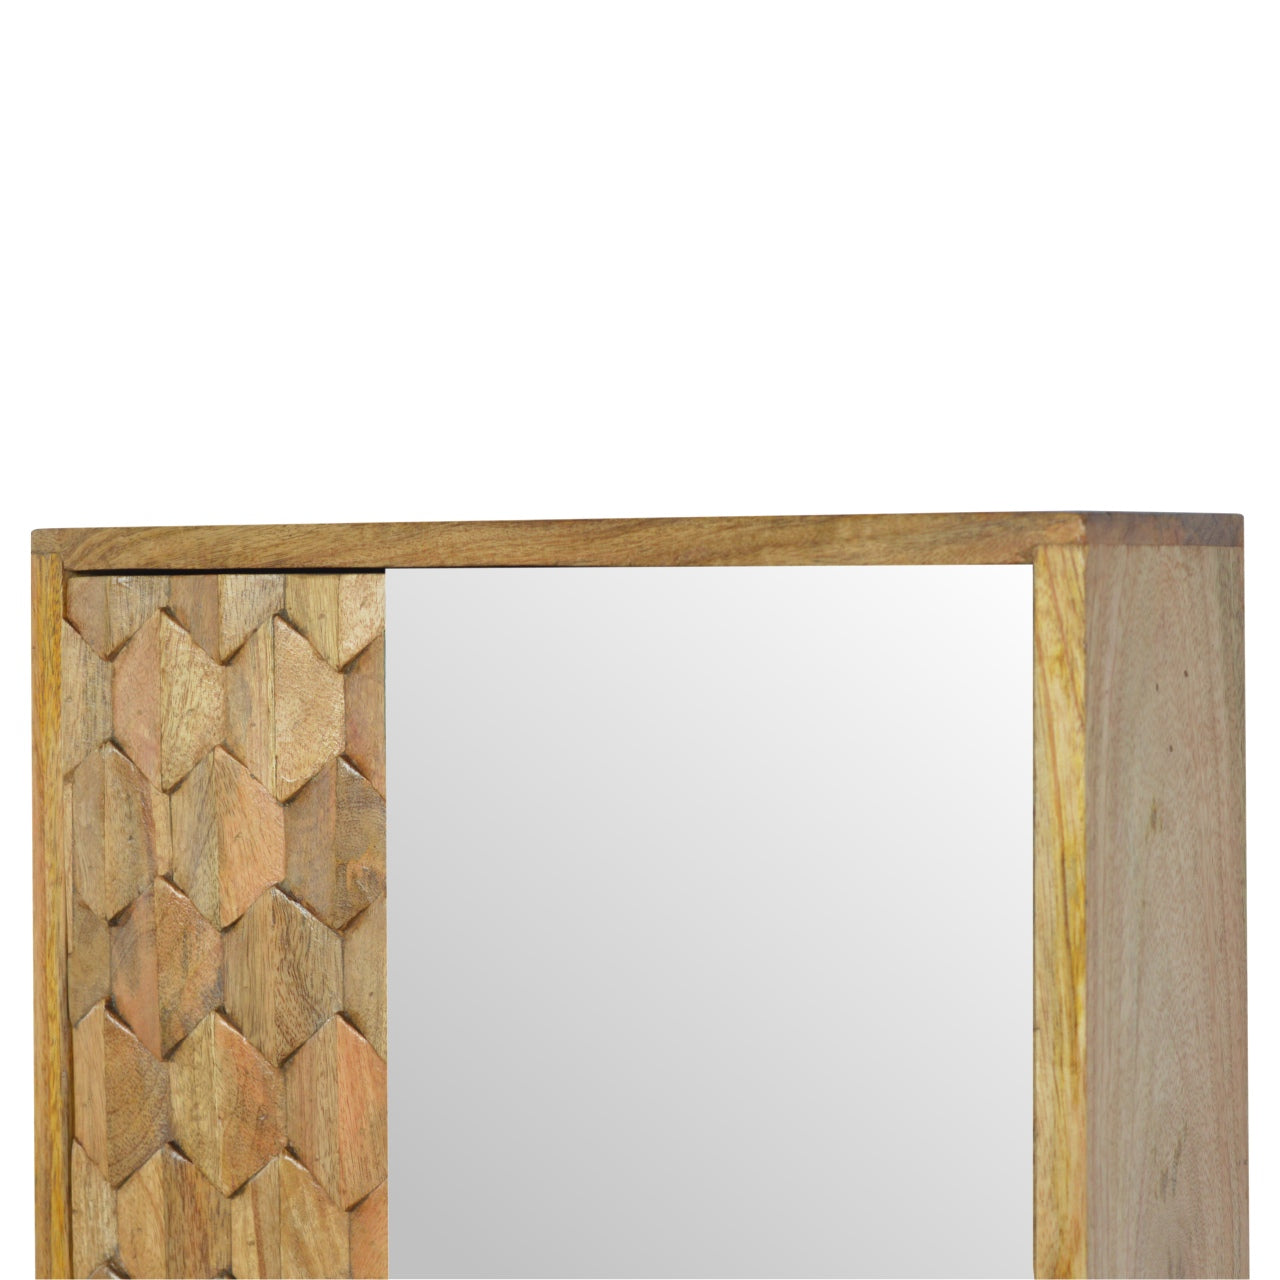 Solid Wood Pineapple Carved Sliding Wall Mirror Cabinet